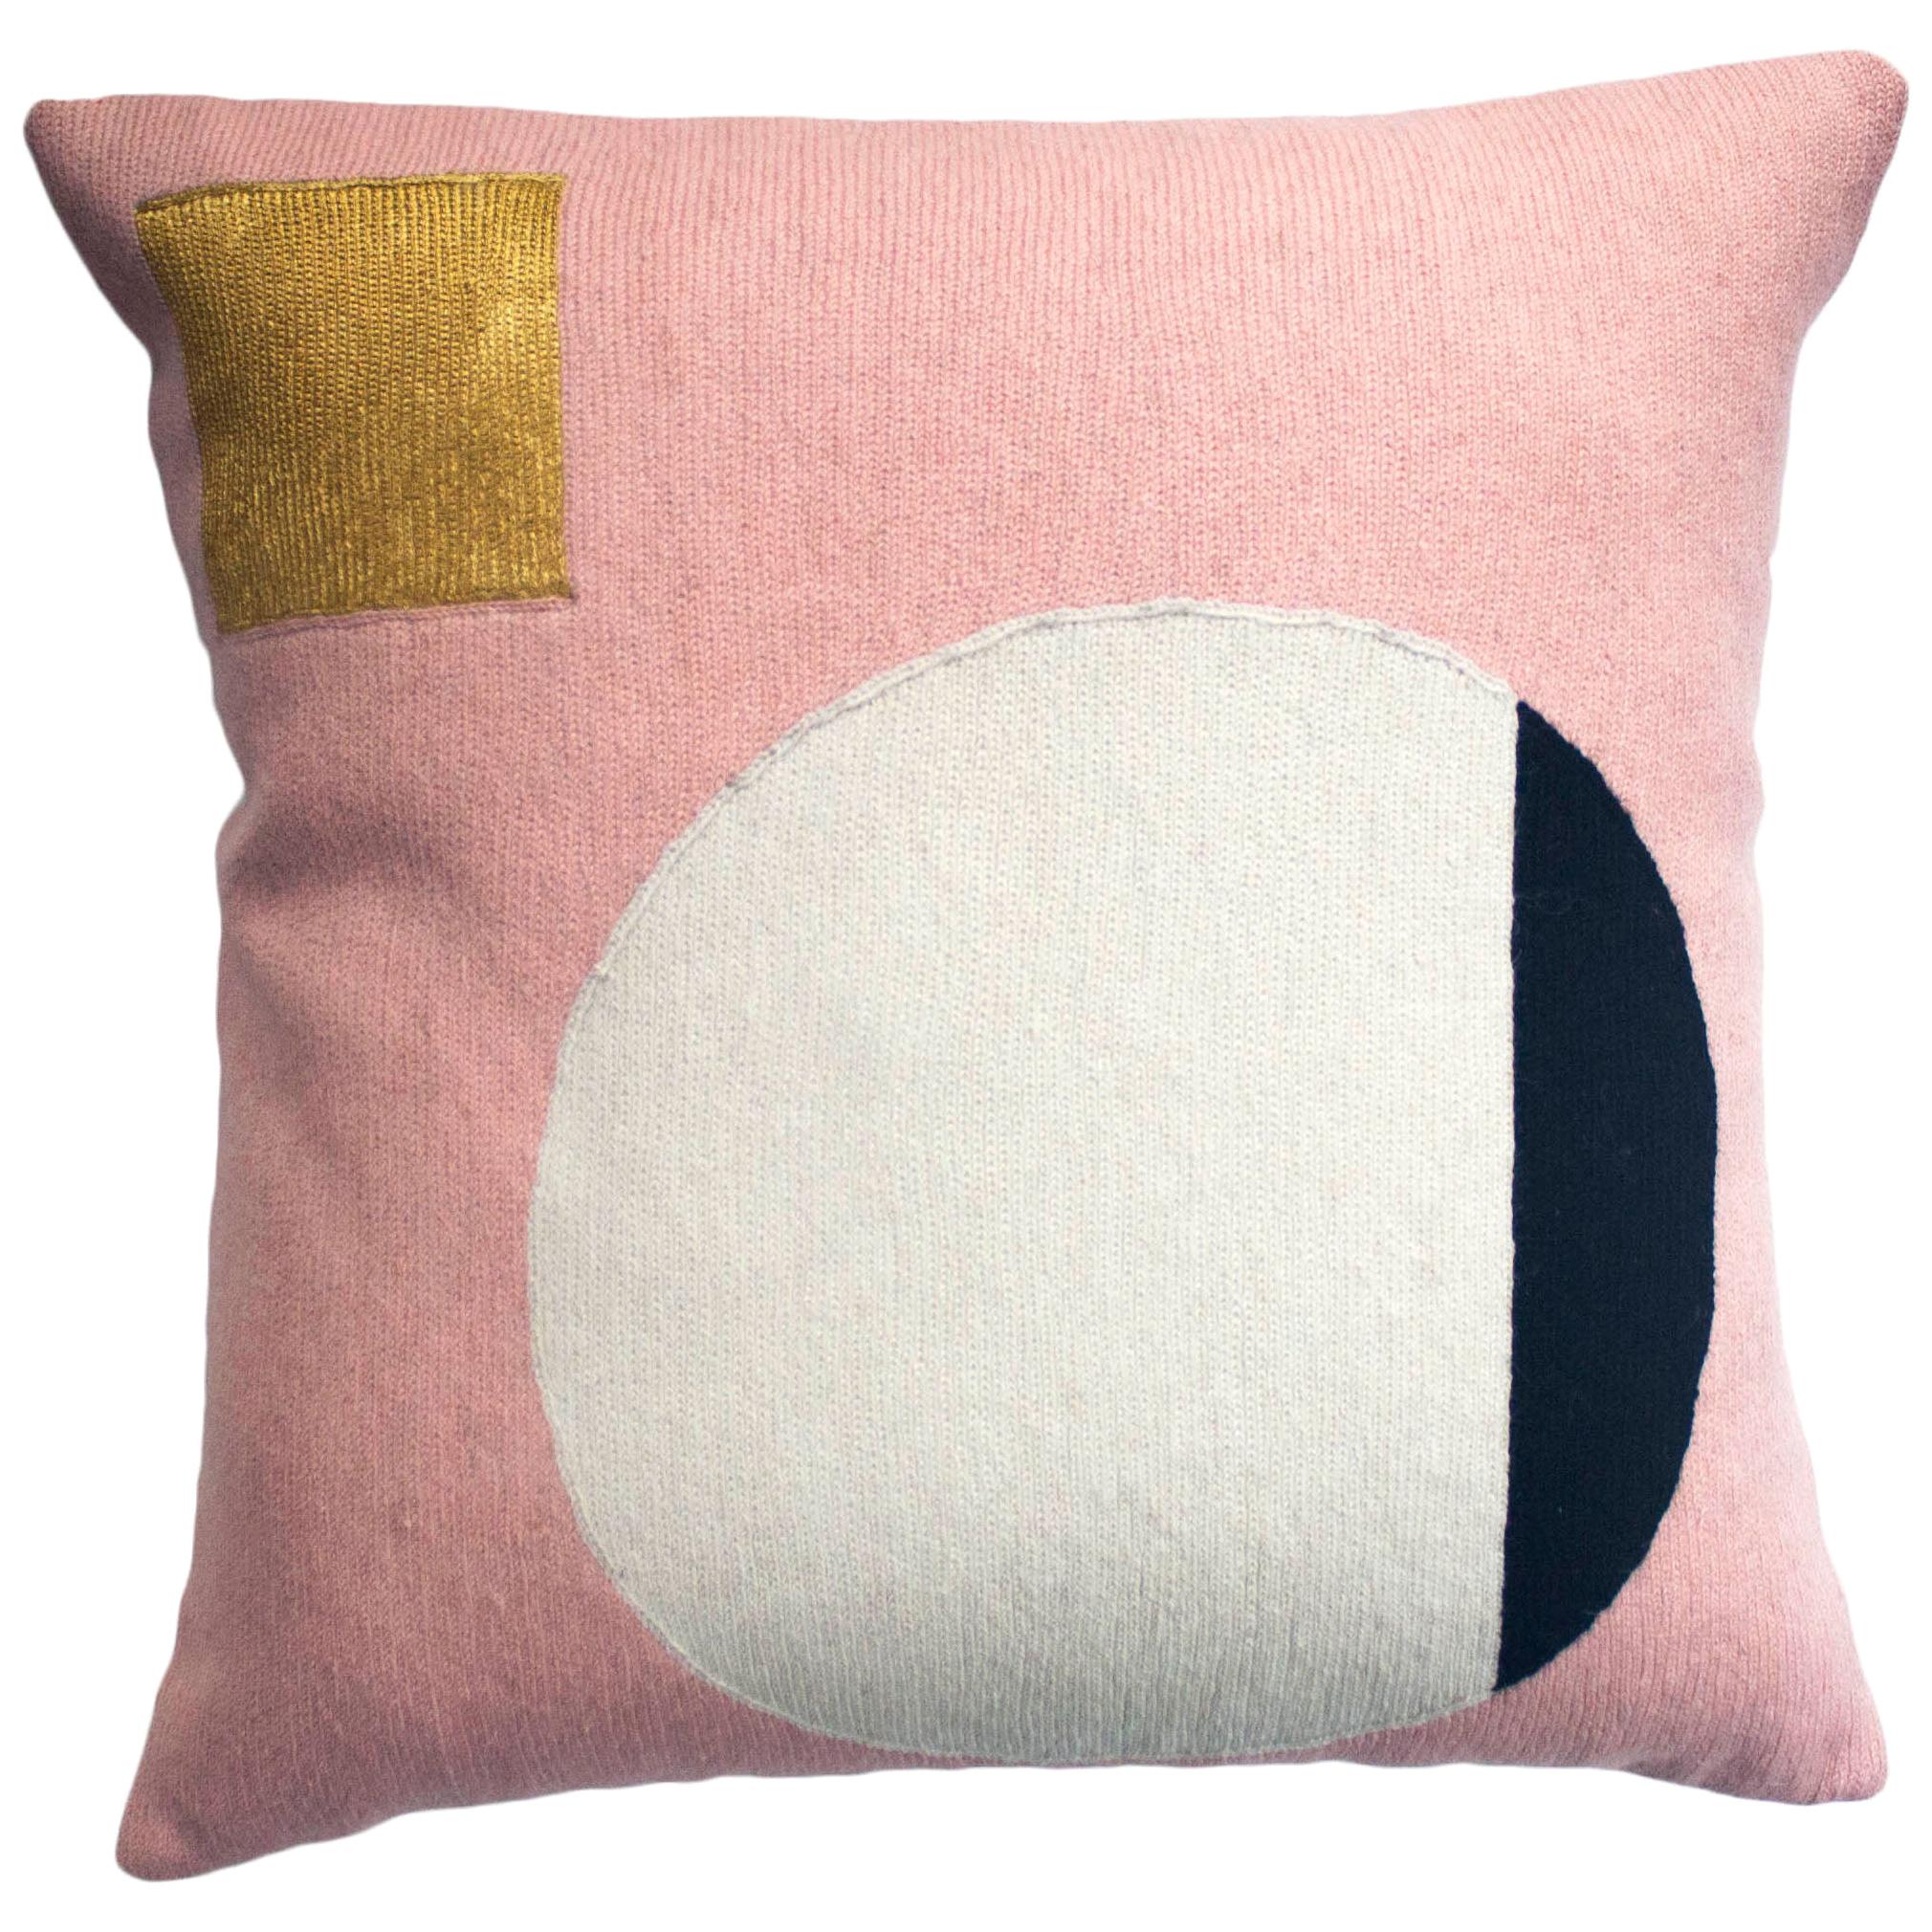 Modern Daphne Circle/Gold Hand Embroidered Geometric Wool Throw Pillow Cover